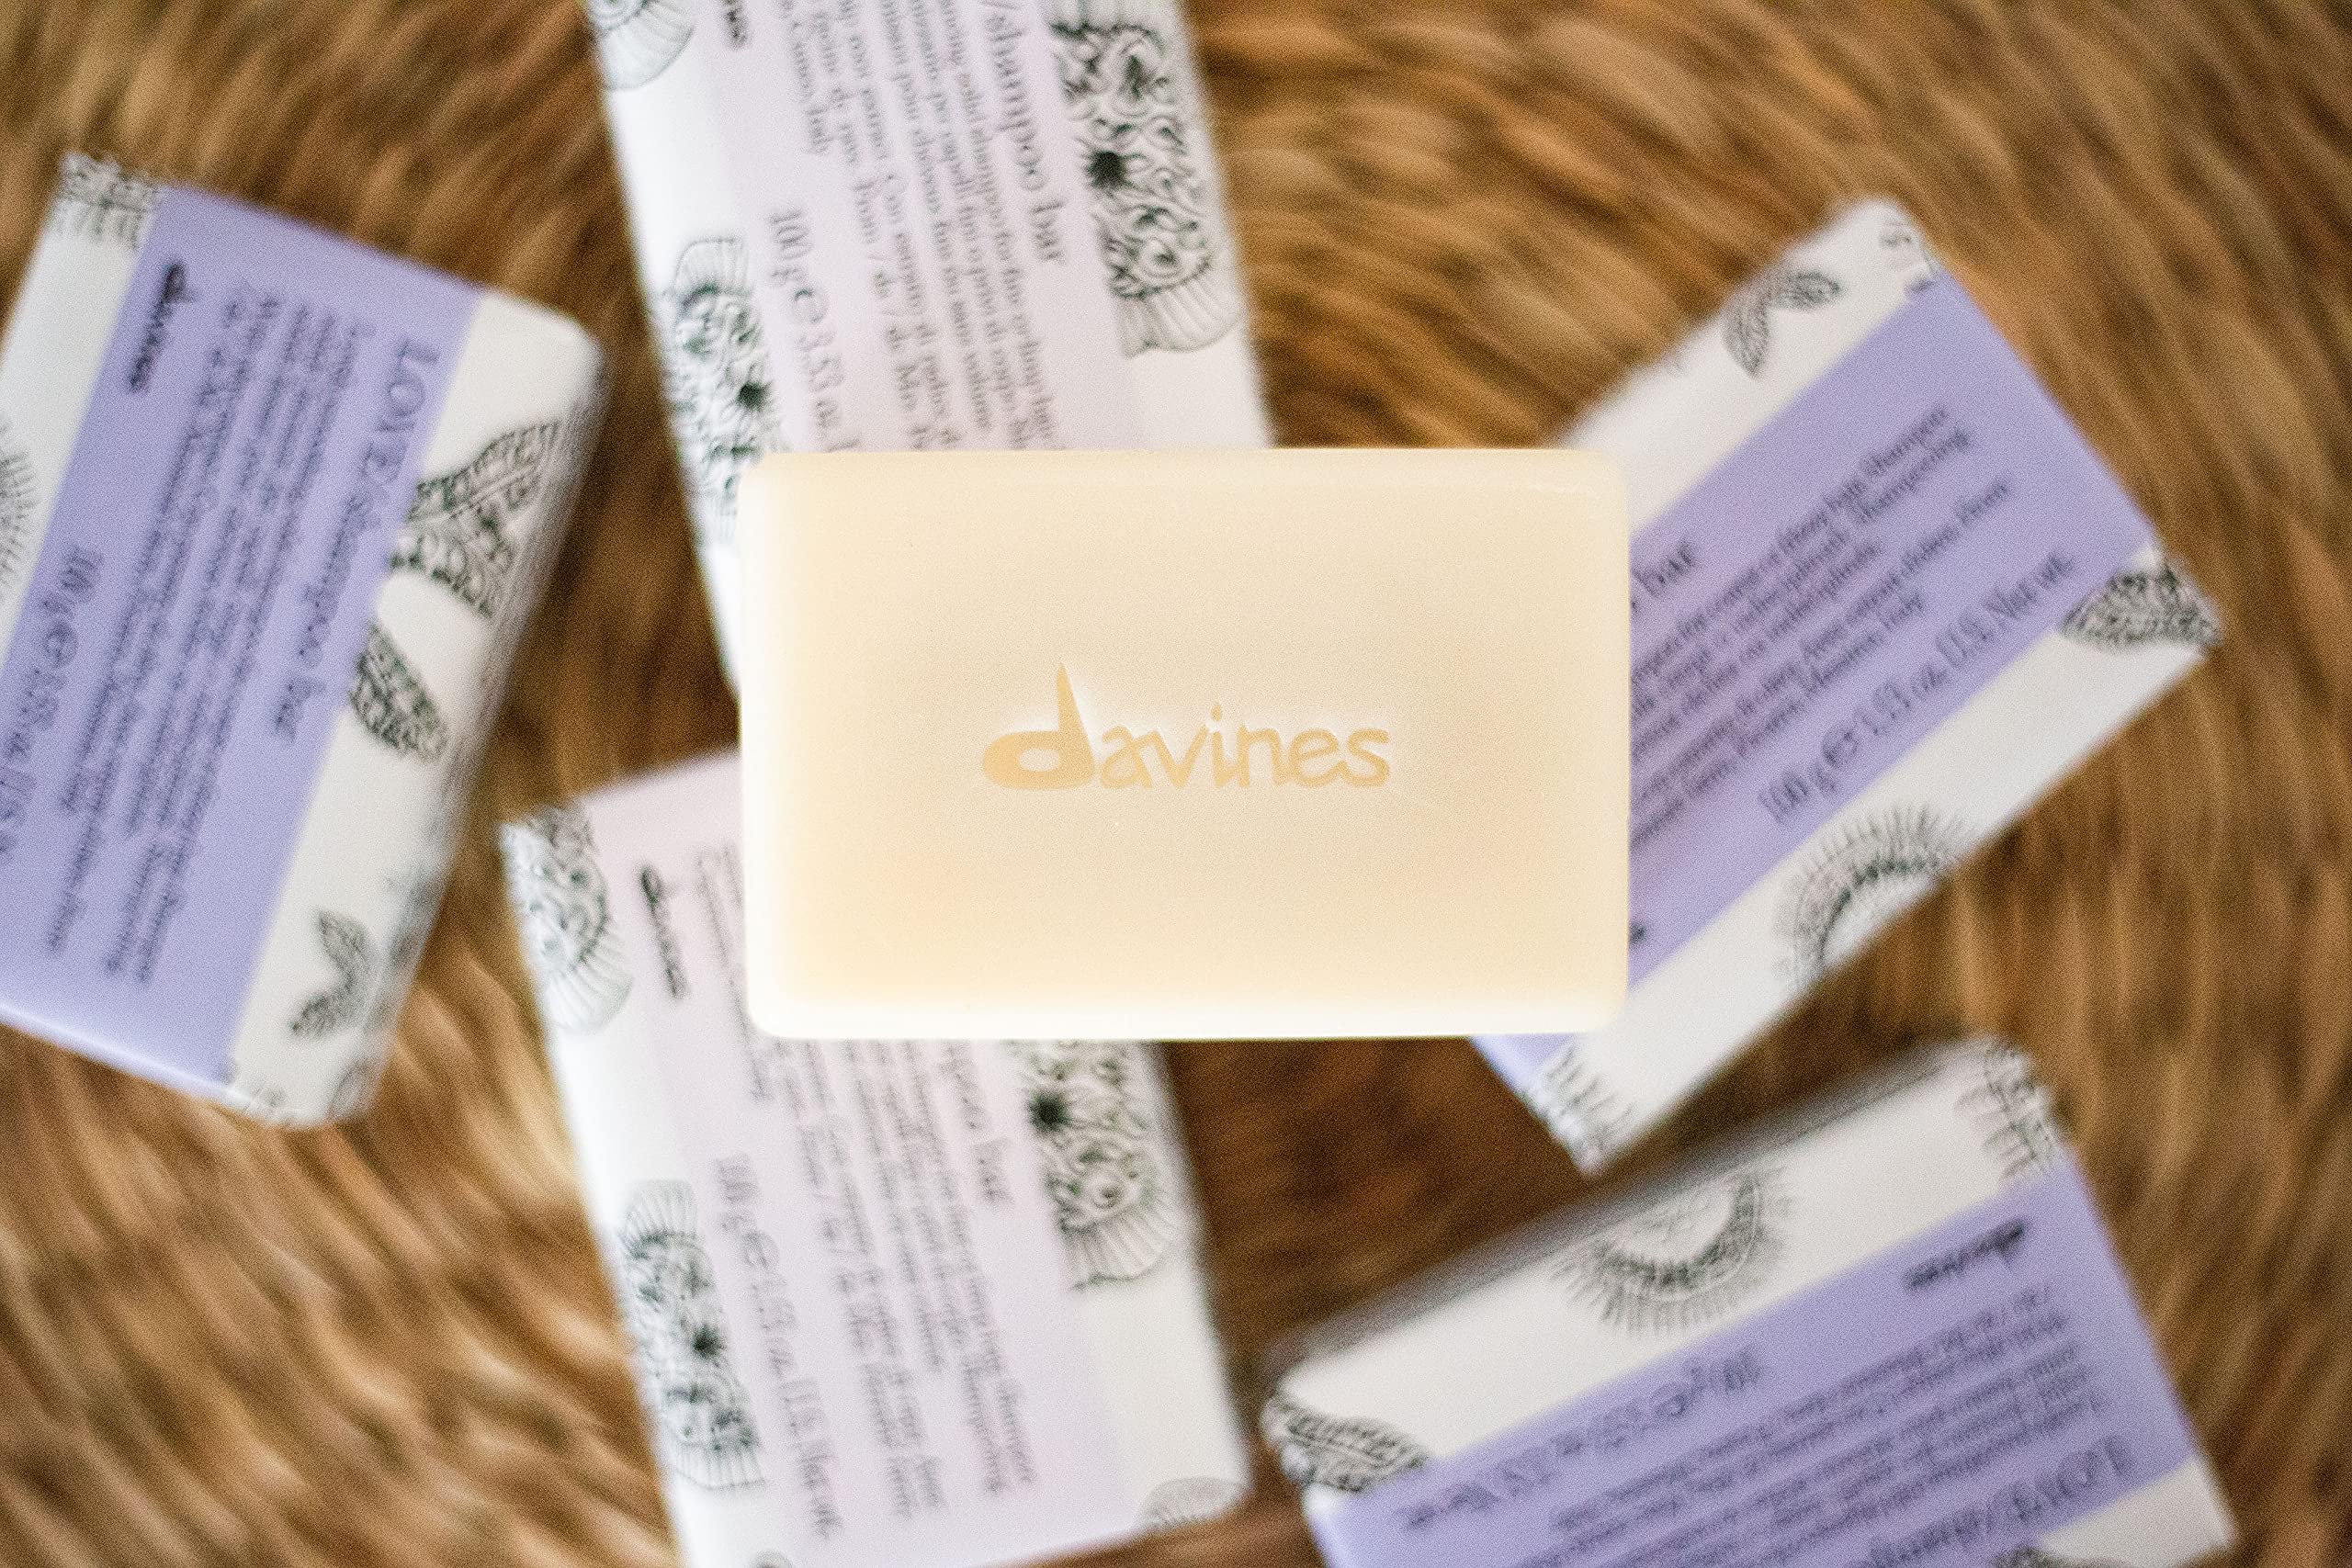 Davines LOVE Shampoo Bar, For Frizzy or Coarse Hair, Add Softness, Shine and Silky Texture, 100 g.